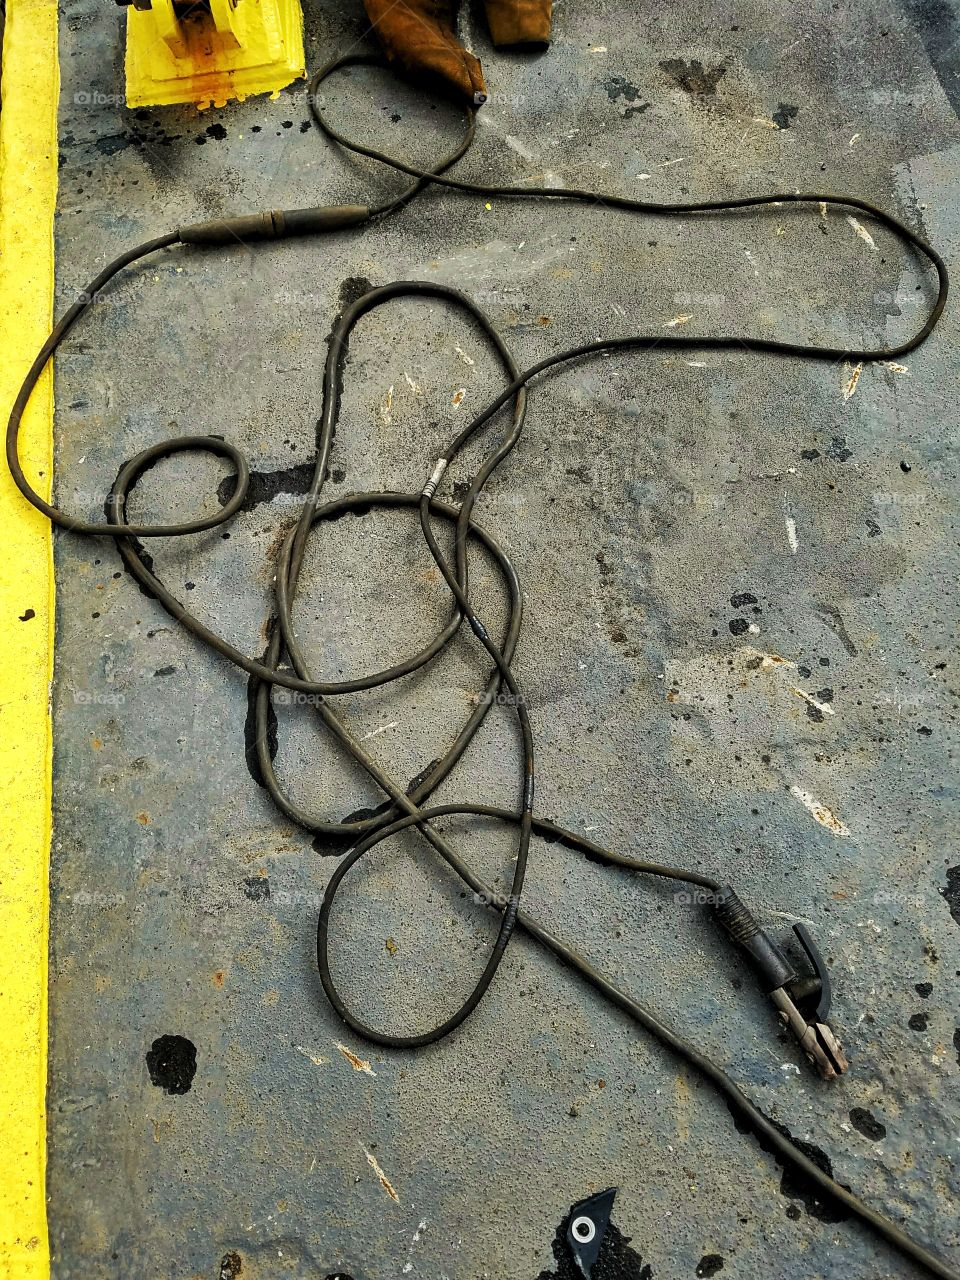 Welding cable on steel deck